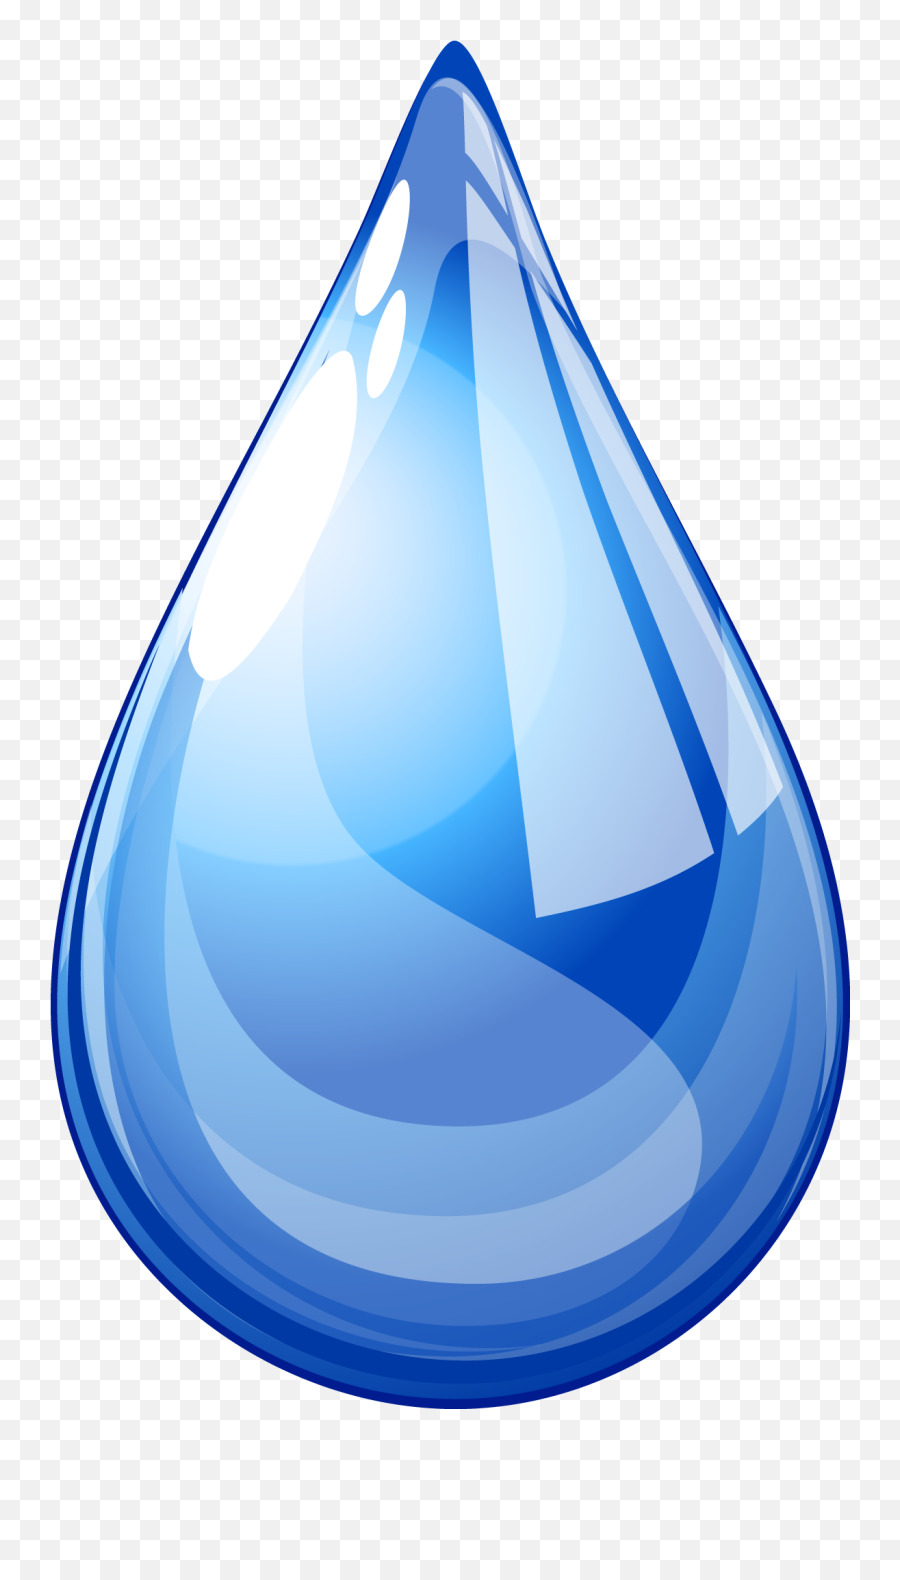 Water Drop Png Photo 46380 - Free Icons And Png Backgrounds Drop Of Water Png,Water Drop Transparent Background